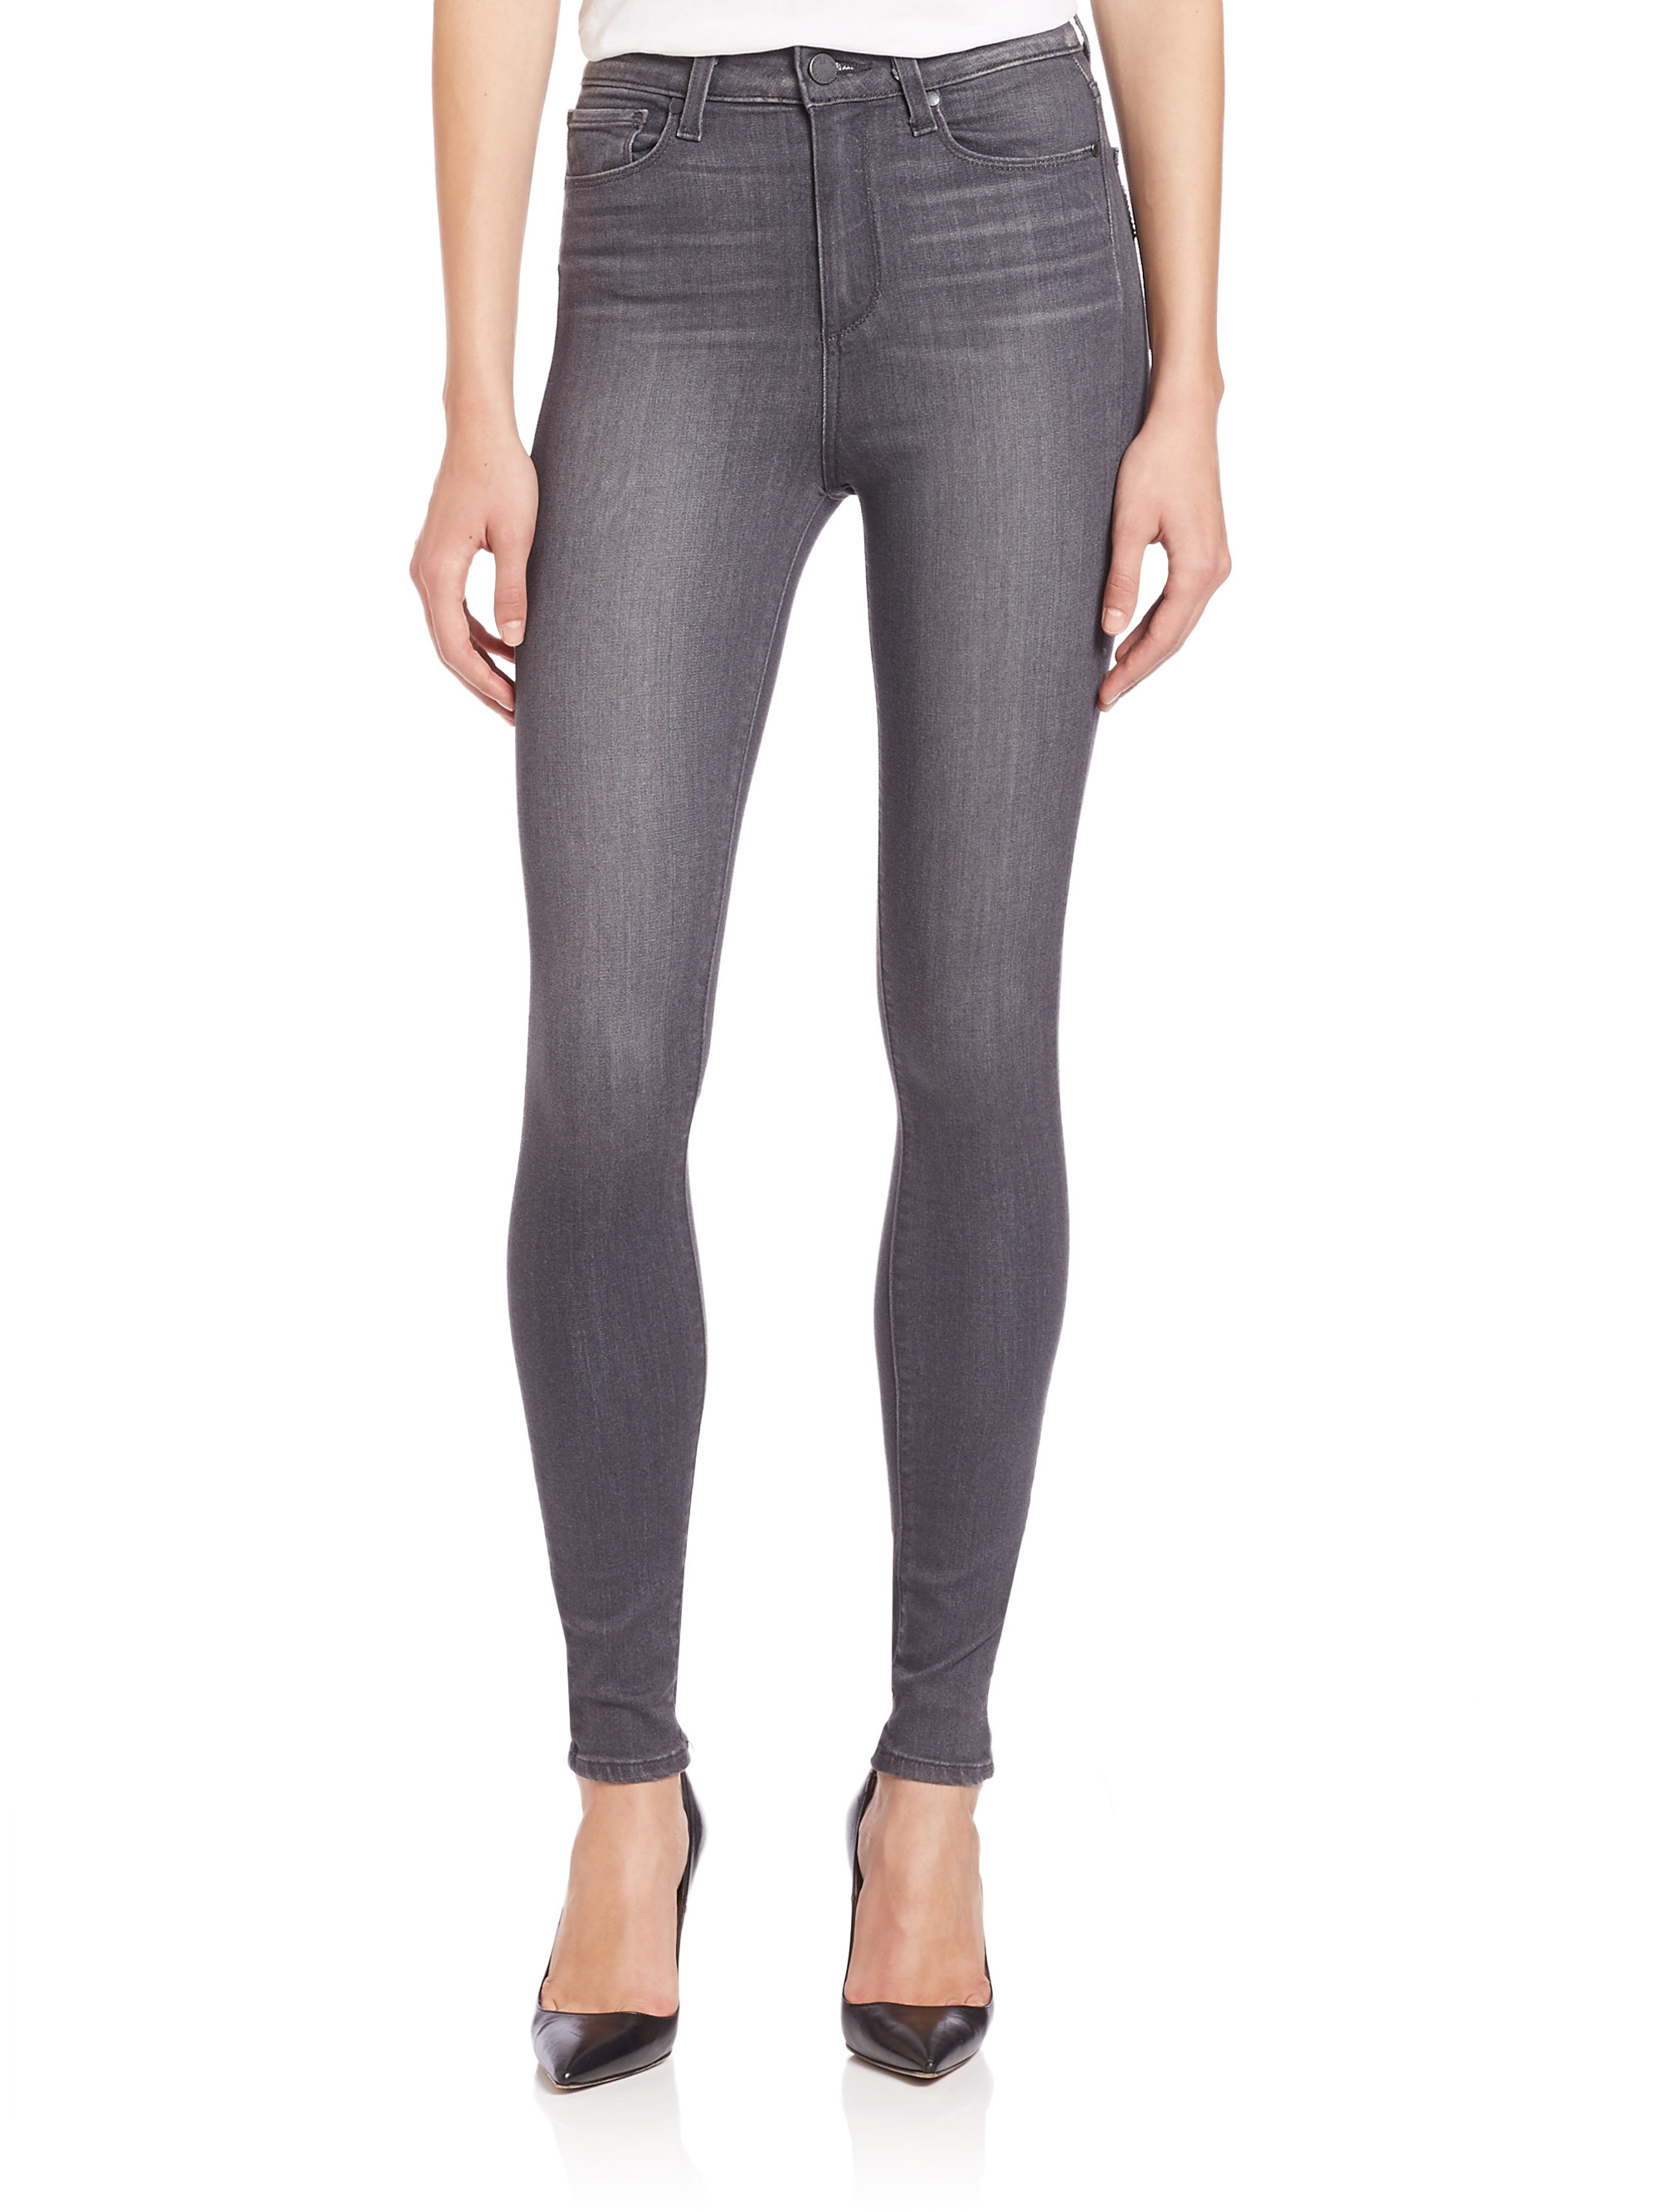 PAIGE Margot High-rise Ultra Skinny Jeans in Gray - Lyst